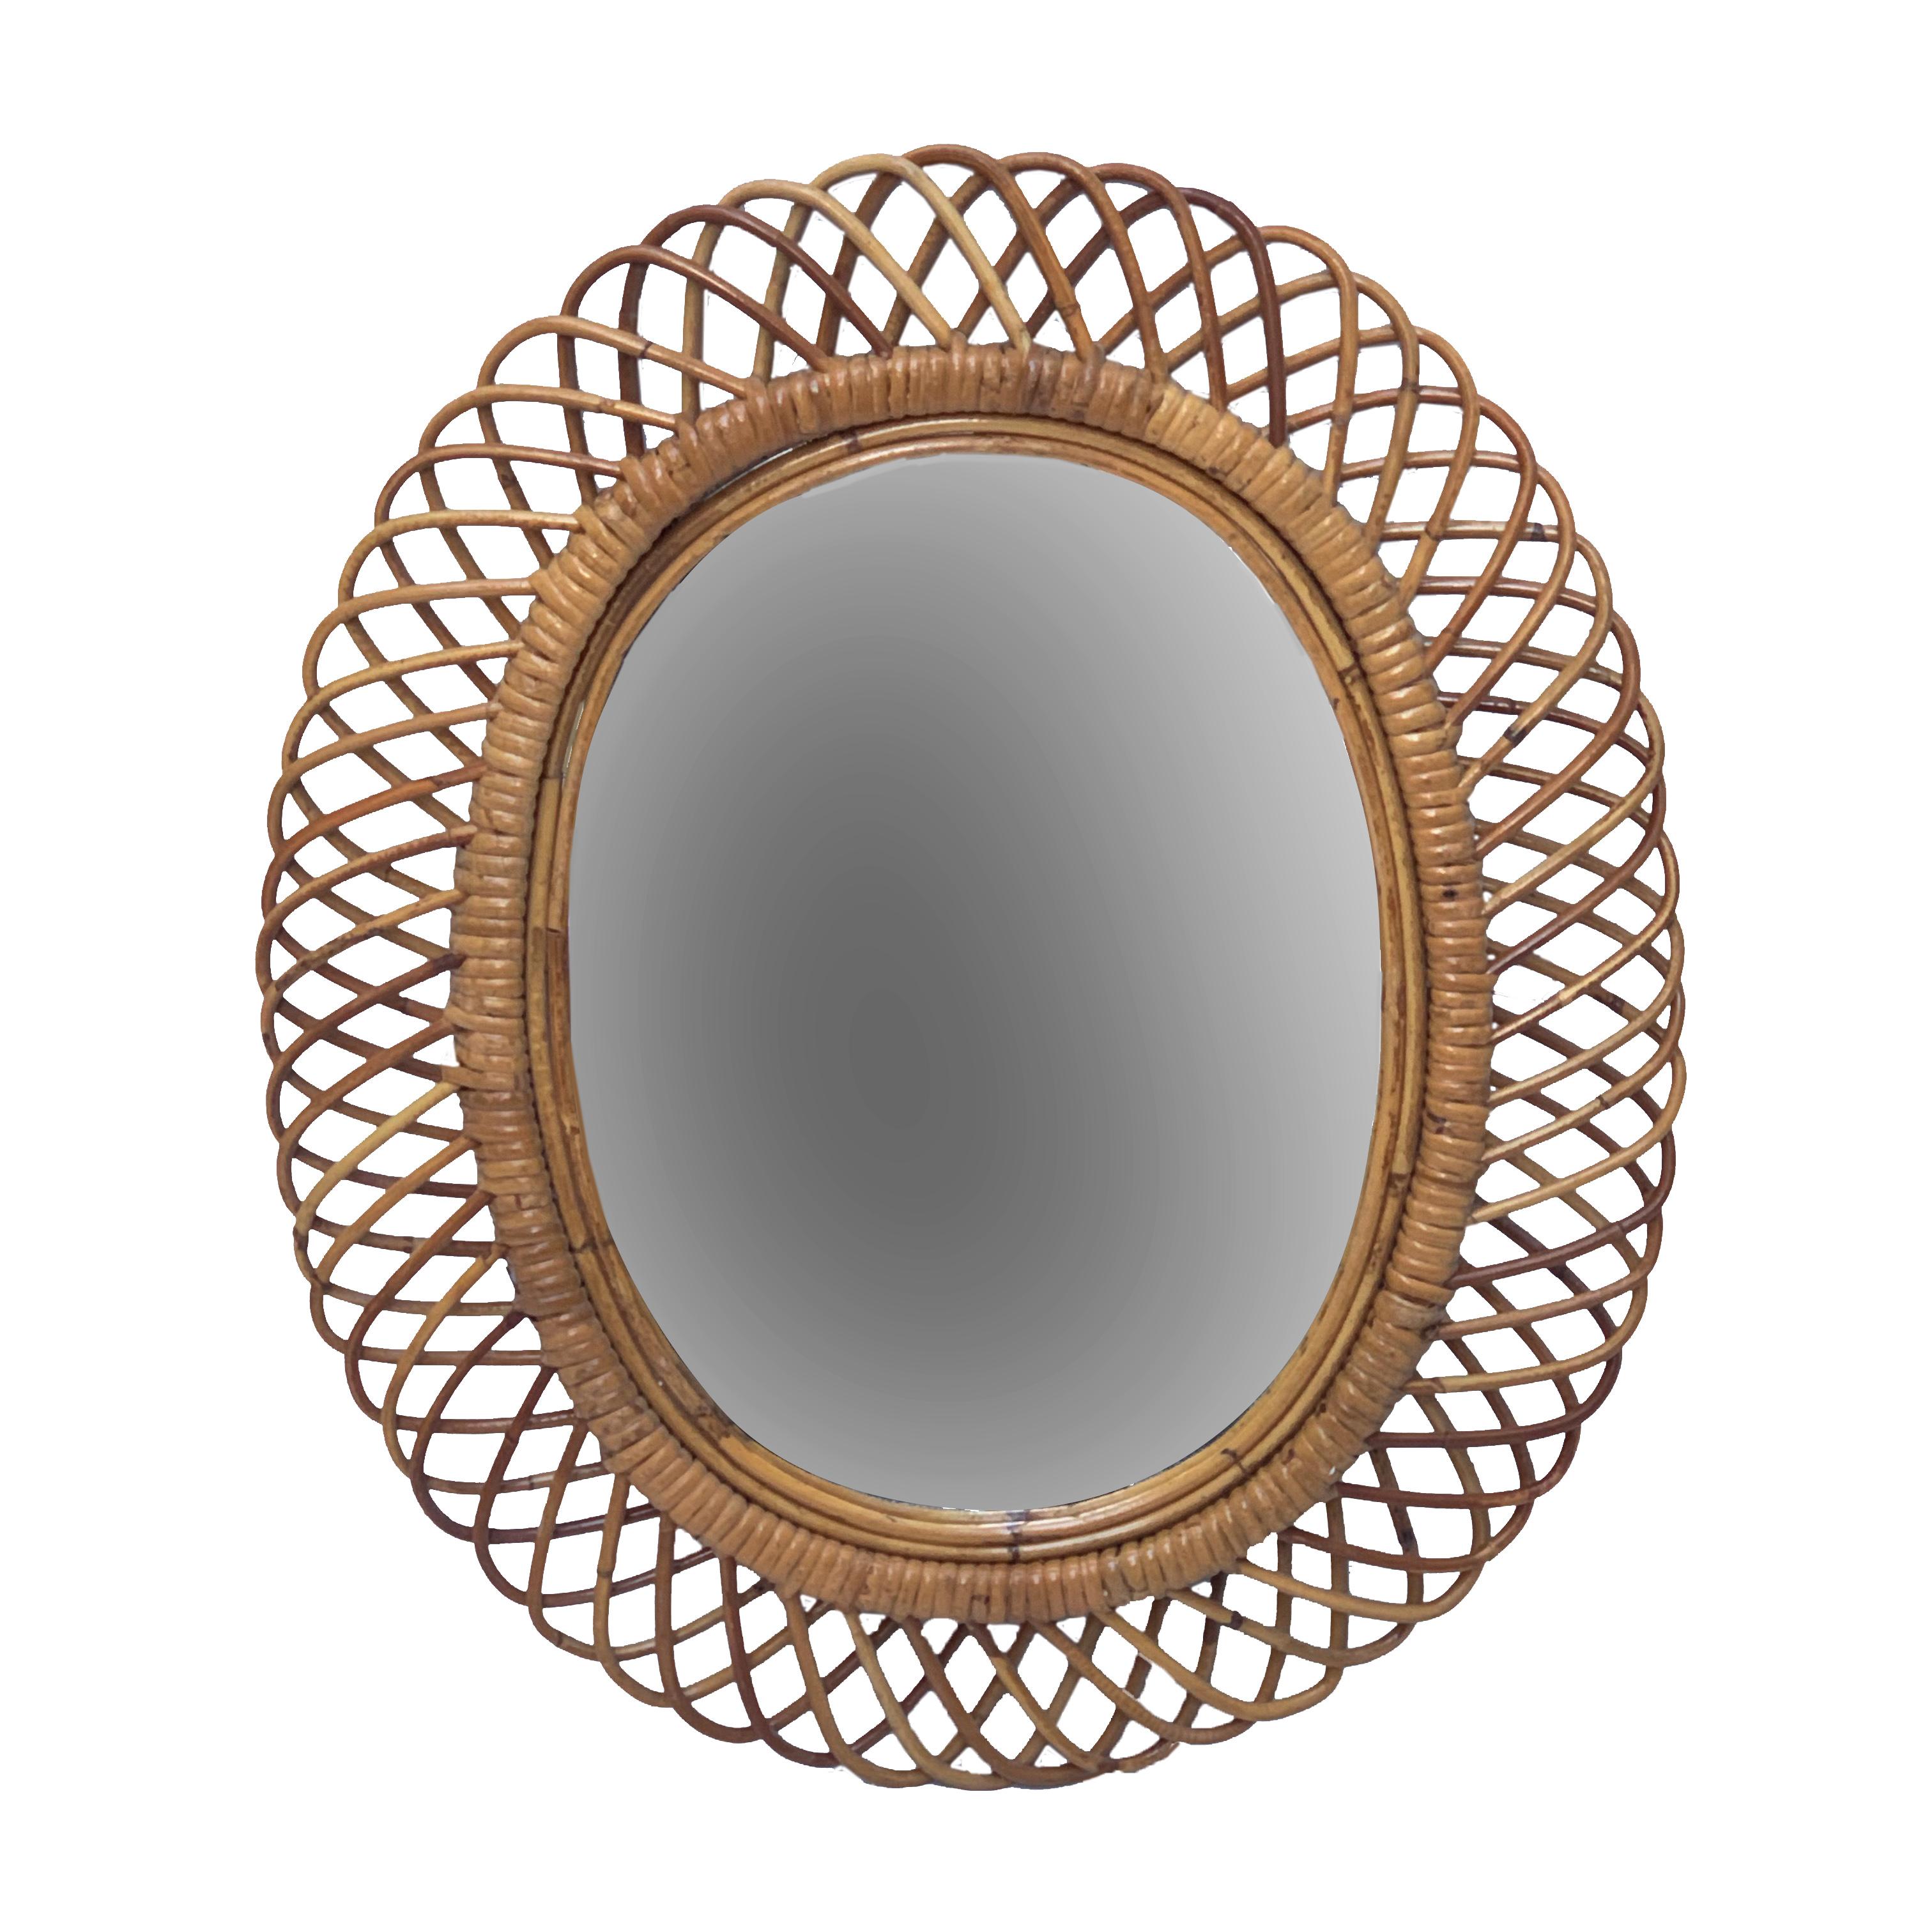 Mid-20th Century Midcentury French Riviera Rattan and Bamboo Italian Oval Mirror, 1960s